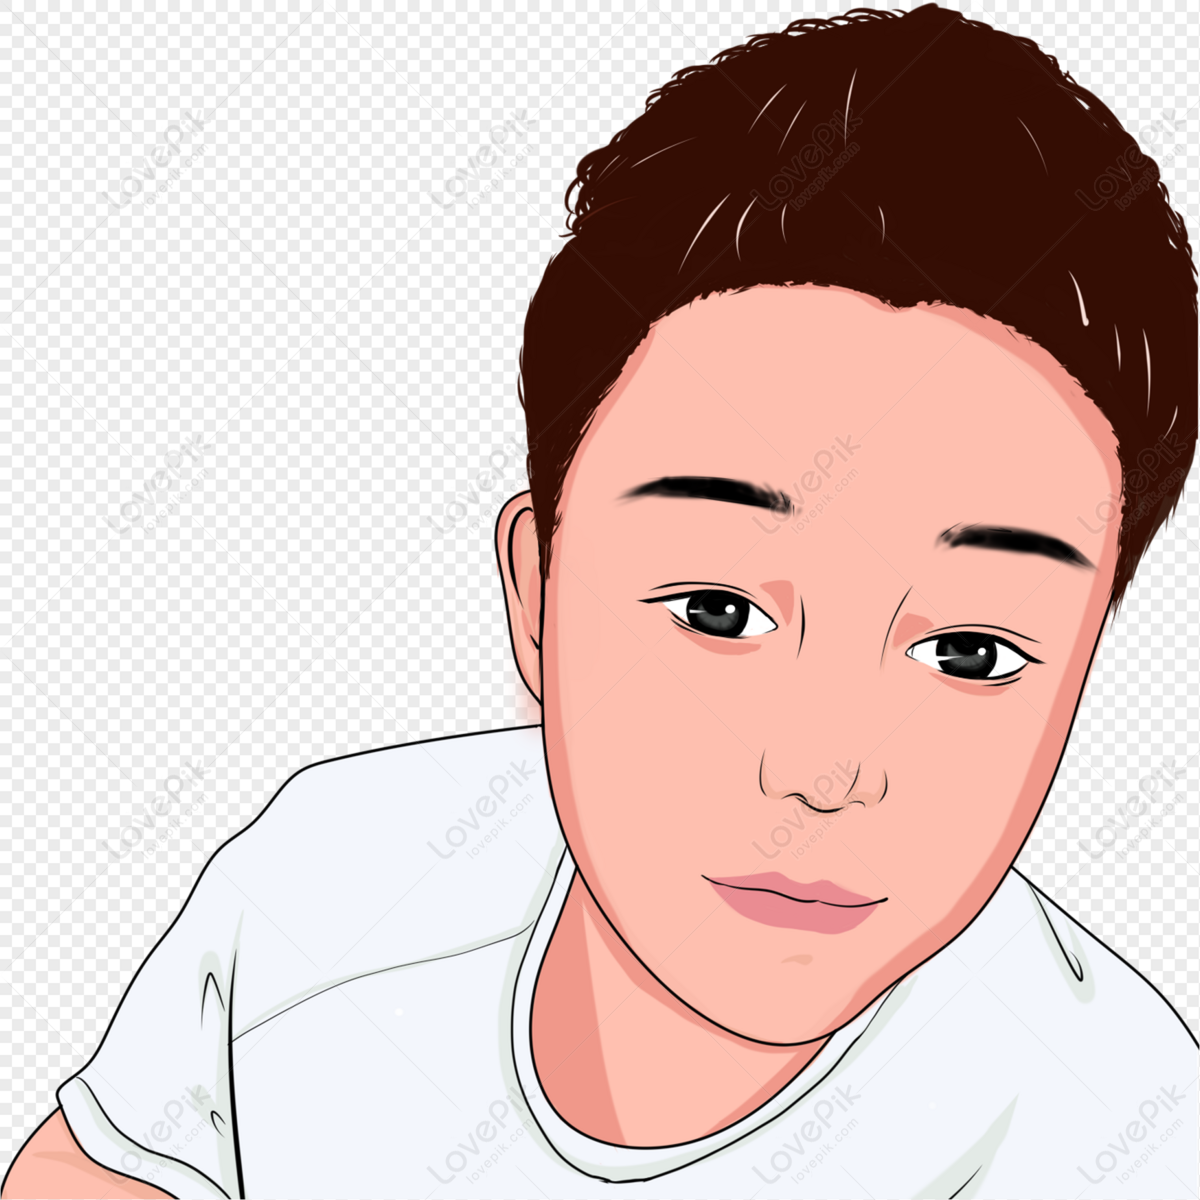 Cartoon Boy PNG Hd Transparent Image And Clipart Image For Free Download -  Lovepik | 401229374